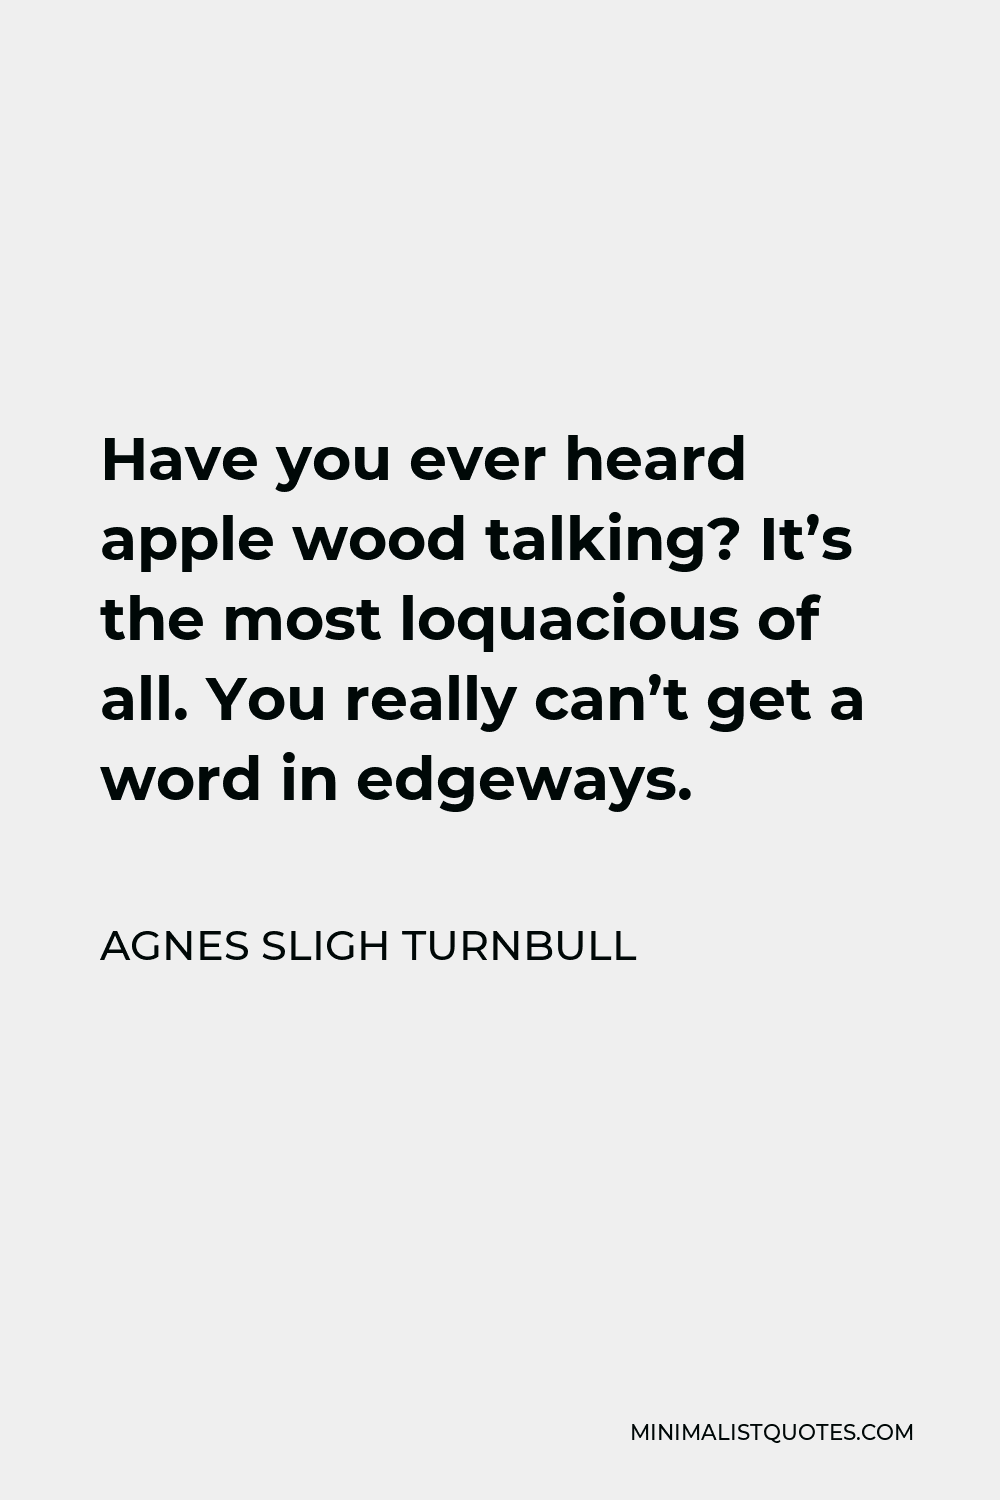 Agnes Sligh Turnbull Quote - Have you ever heard apple wood talking? It’s the most loquacious of all. You really can’t get a word in edgeways.